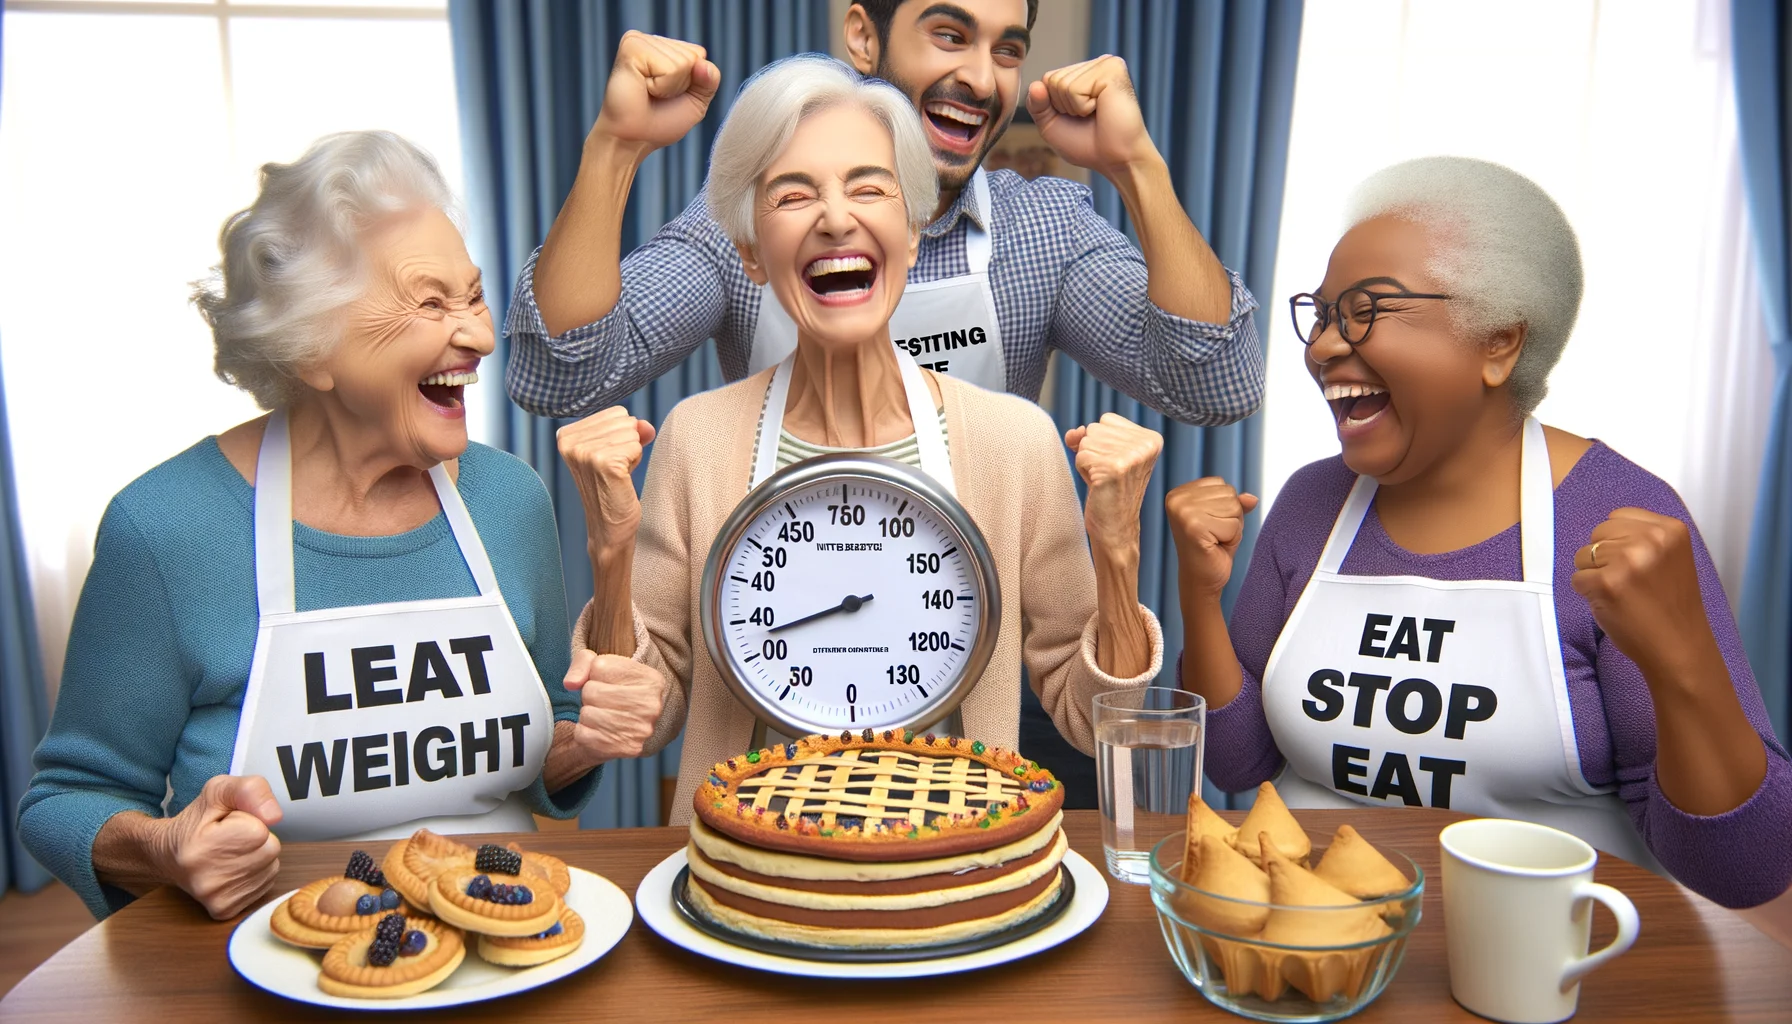 Generate a humorous, realistic image depicting a scene of a group of senior citizens engaging in the 'eat stop eat' intermittent fasting method. The humorous twist should include them not just losing weight but also winning at a local bake sale competition or beating their grandchildren at a pie-eating contest due to their new found dietary discipline. There's a Caucasian elderly woman who is spirited and full of joy, a South Asian elderly man who is quite competitive, and a Black elderly woman who is mischievous.